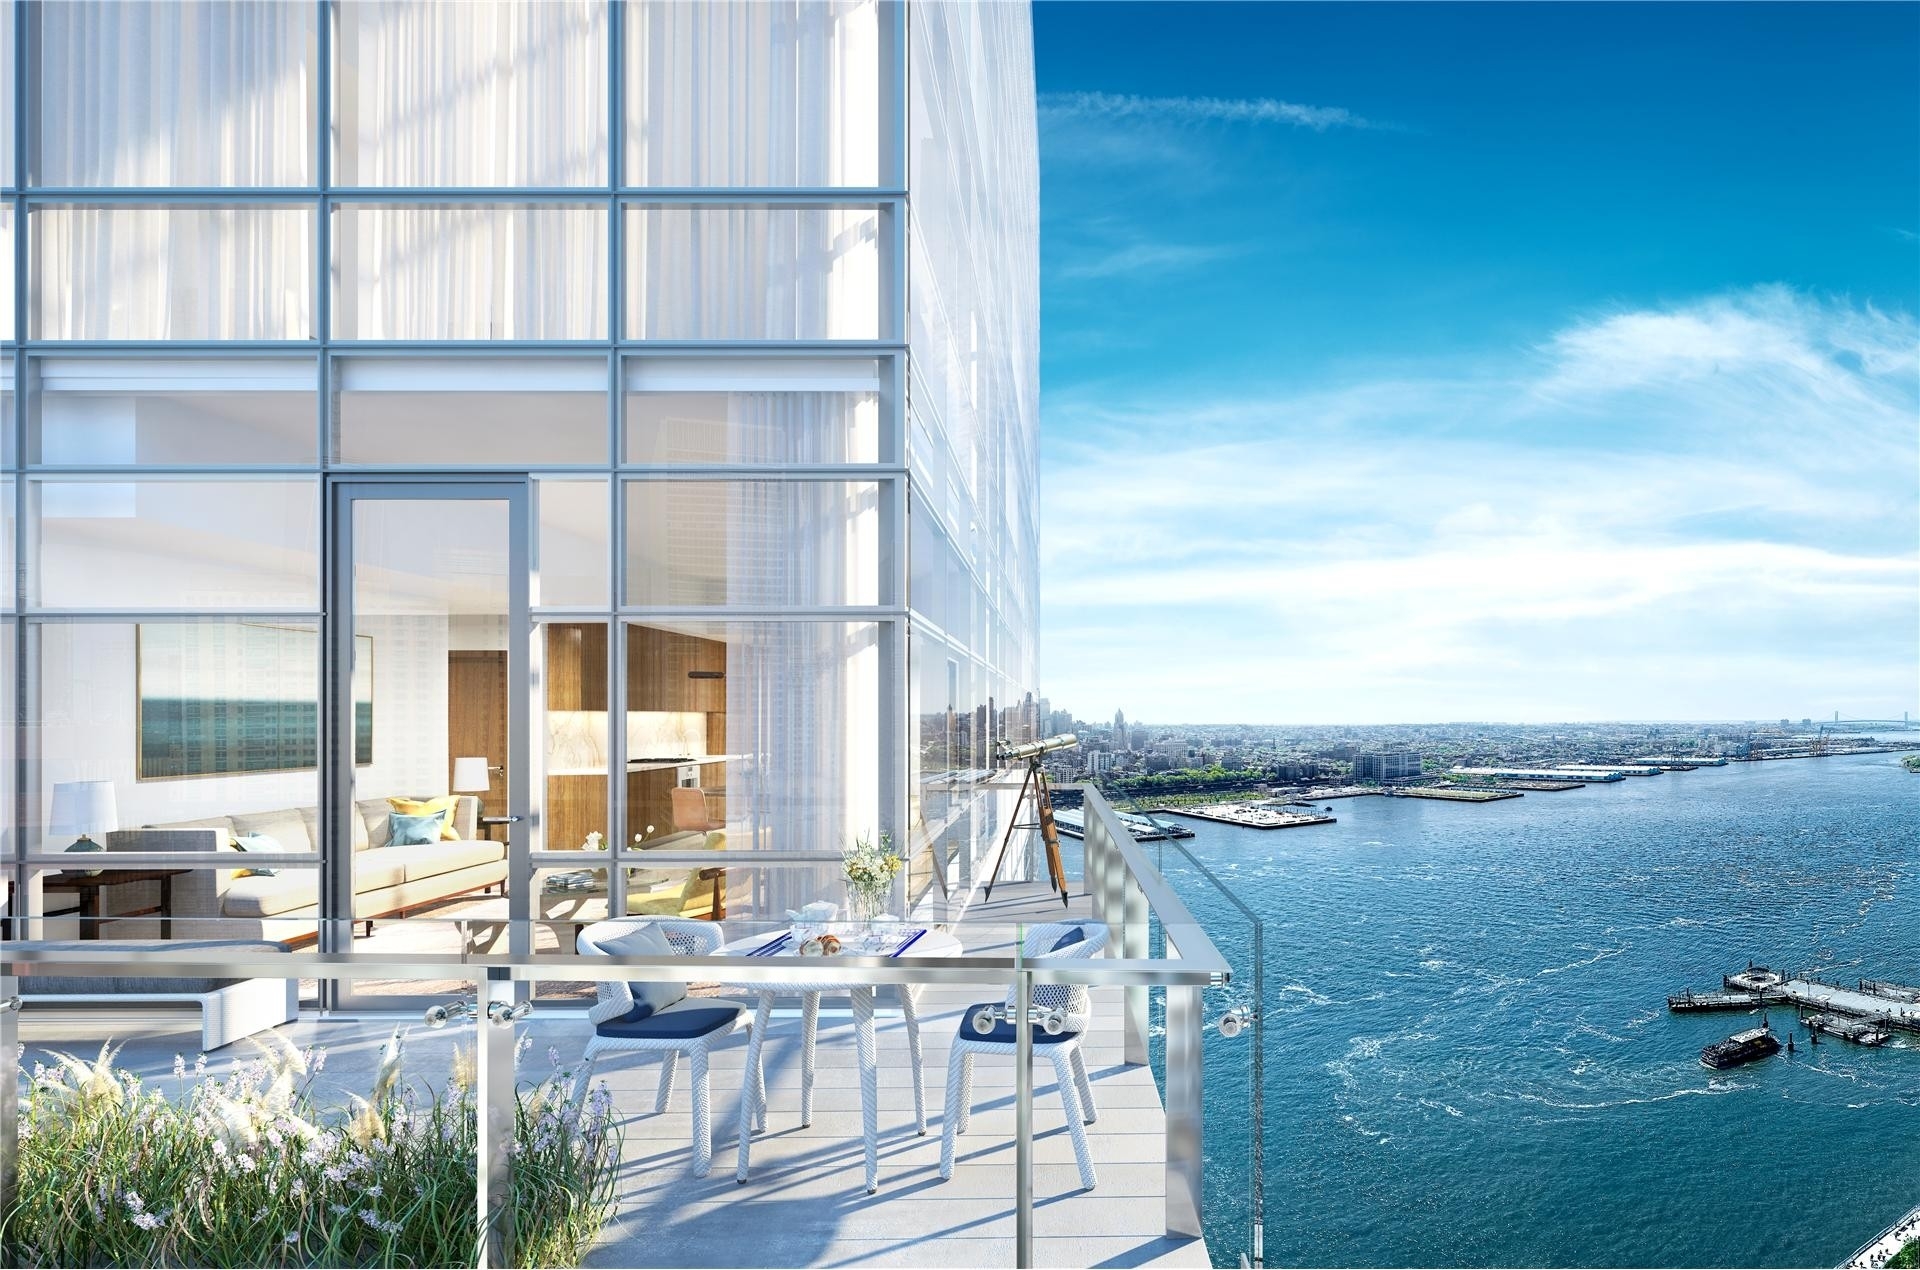 Property at Seaport Residences, 161 MAIDEN LN, 33A South Street Seaport, New York, New York 10038